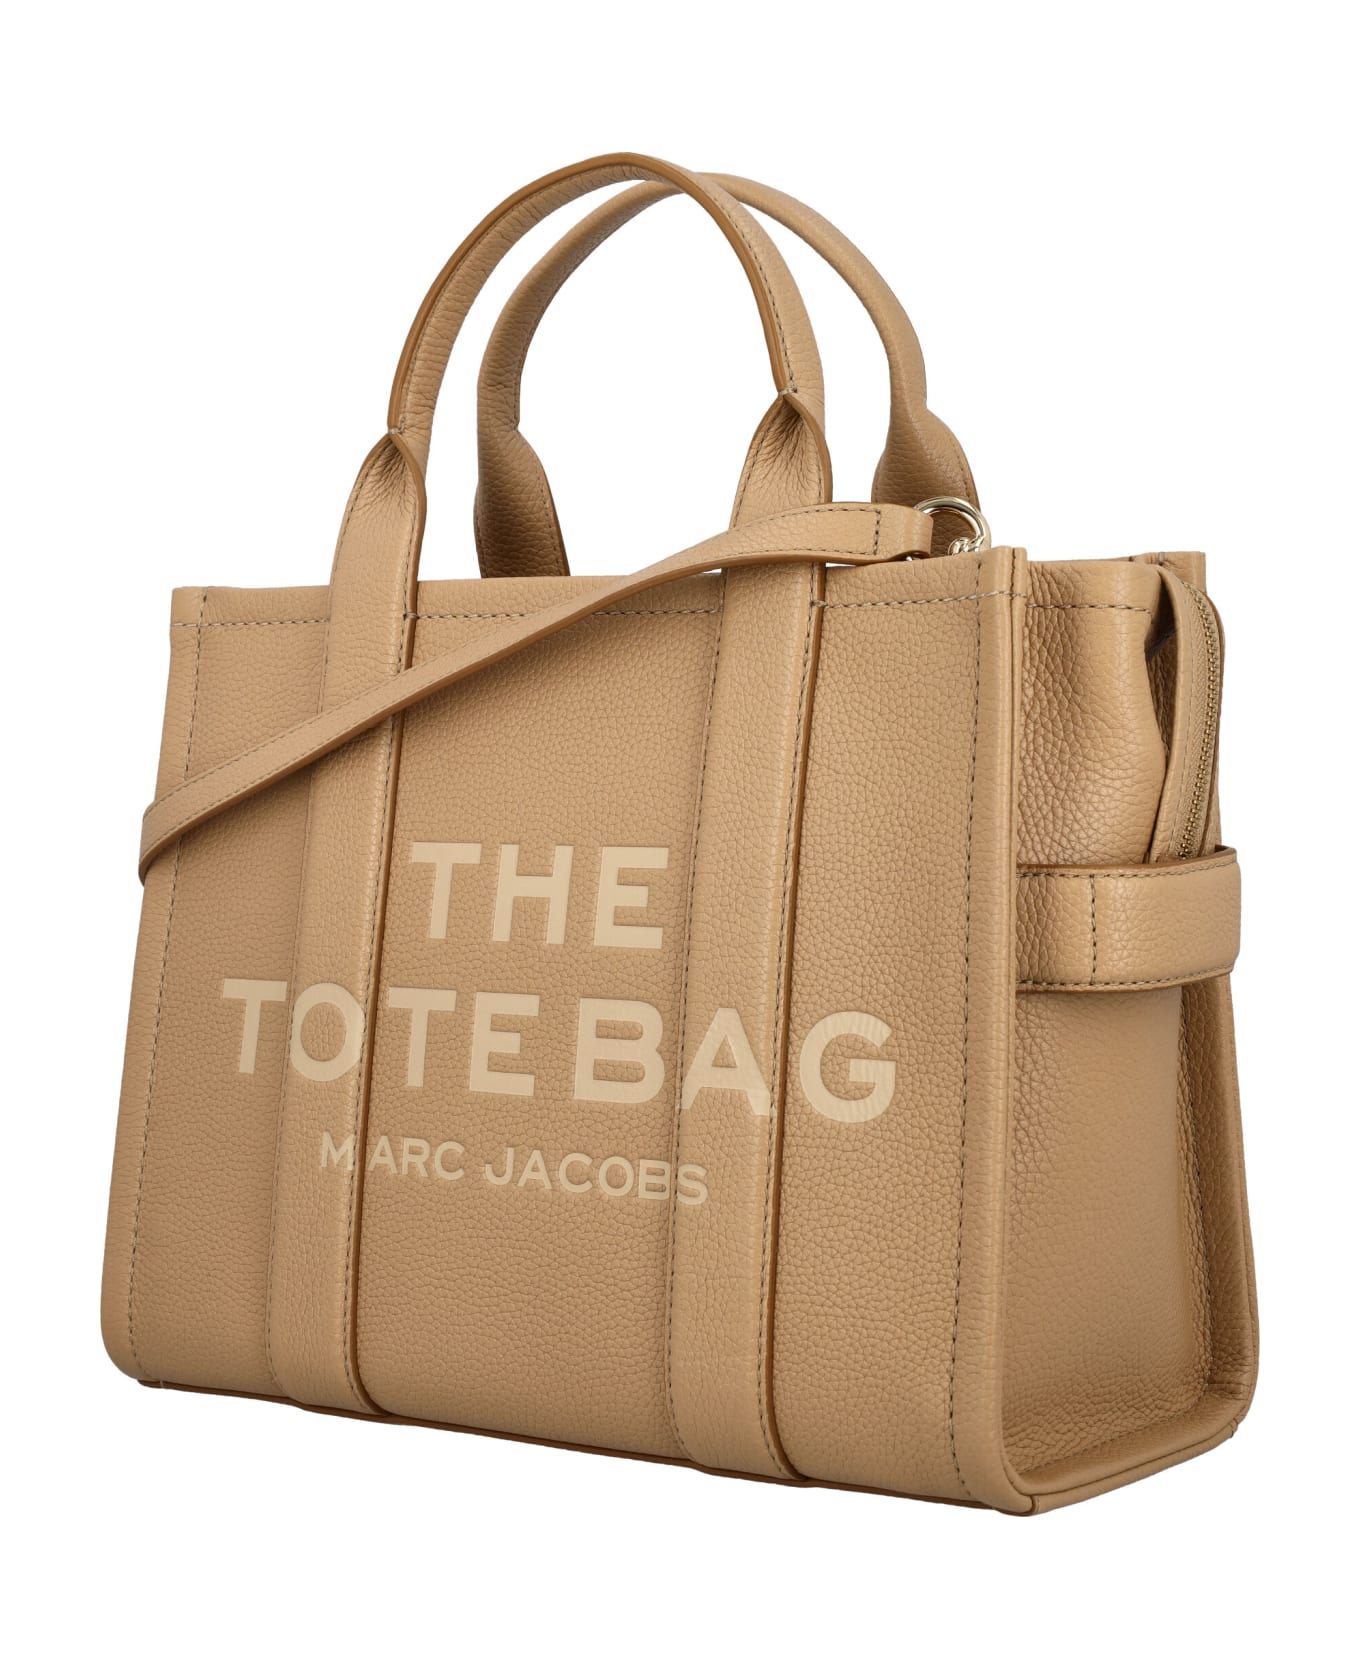 Marc Jacobs The Leather Medium Tote Bag - CAMEL